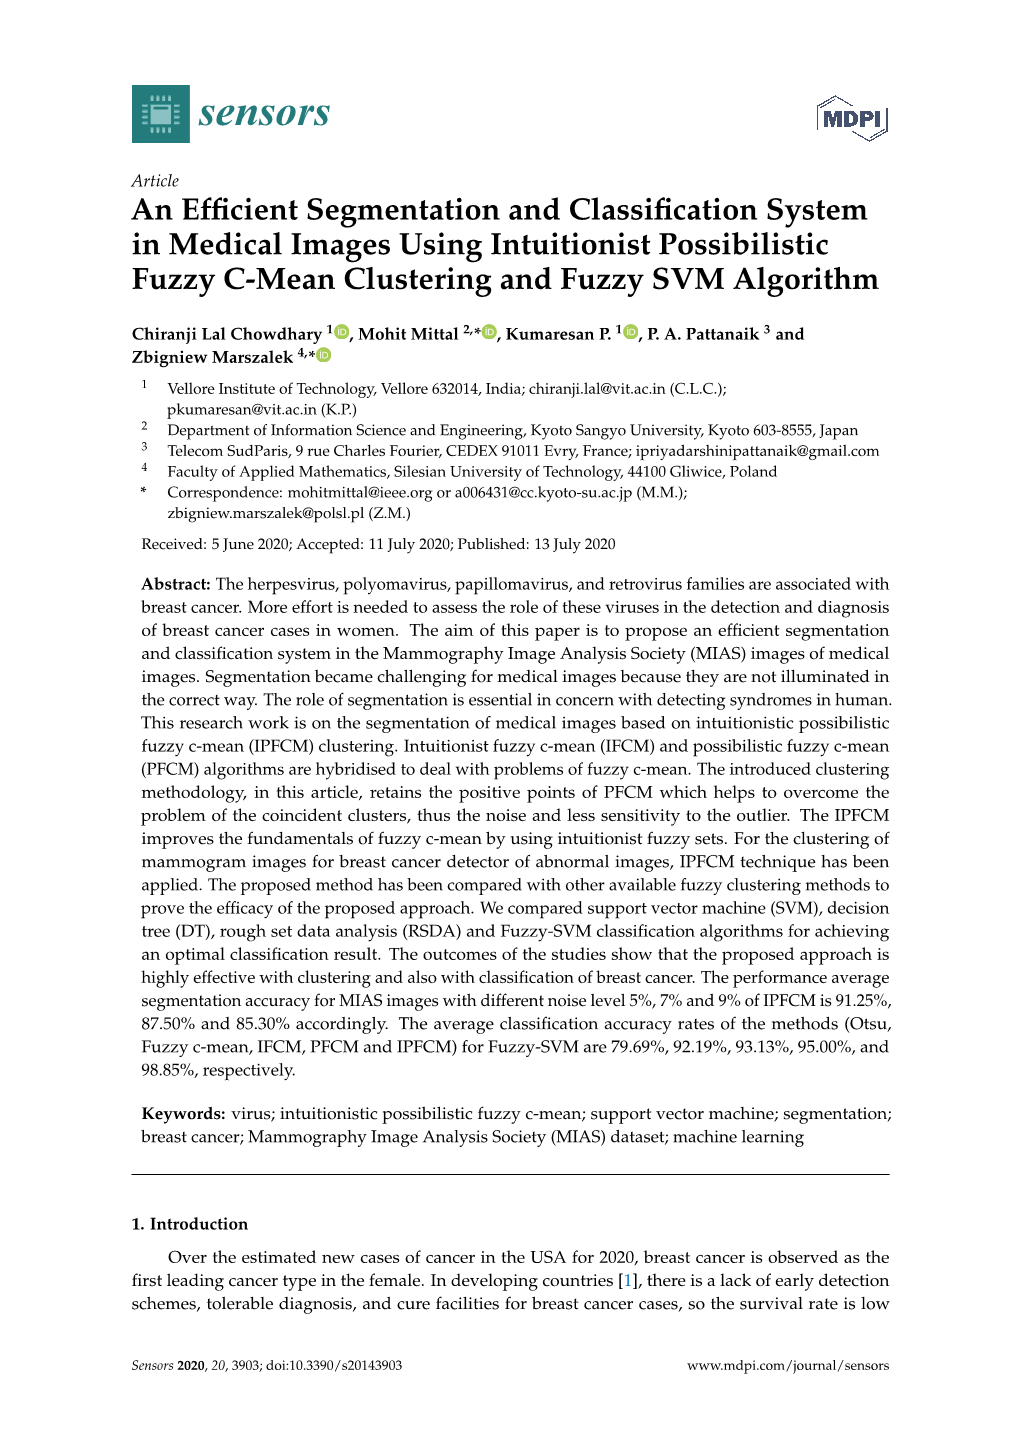 An Efficient Segmentation and Classification System in Medical Images Using Intuitionist Possibilistic Fuzzy C-Mean Clustering and Fuzzy SVM Algorithm